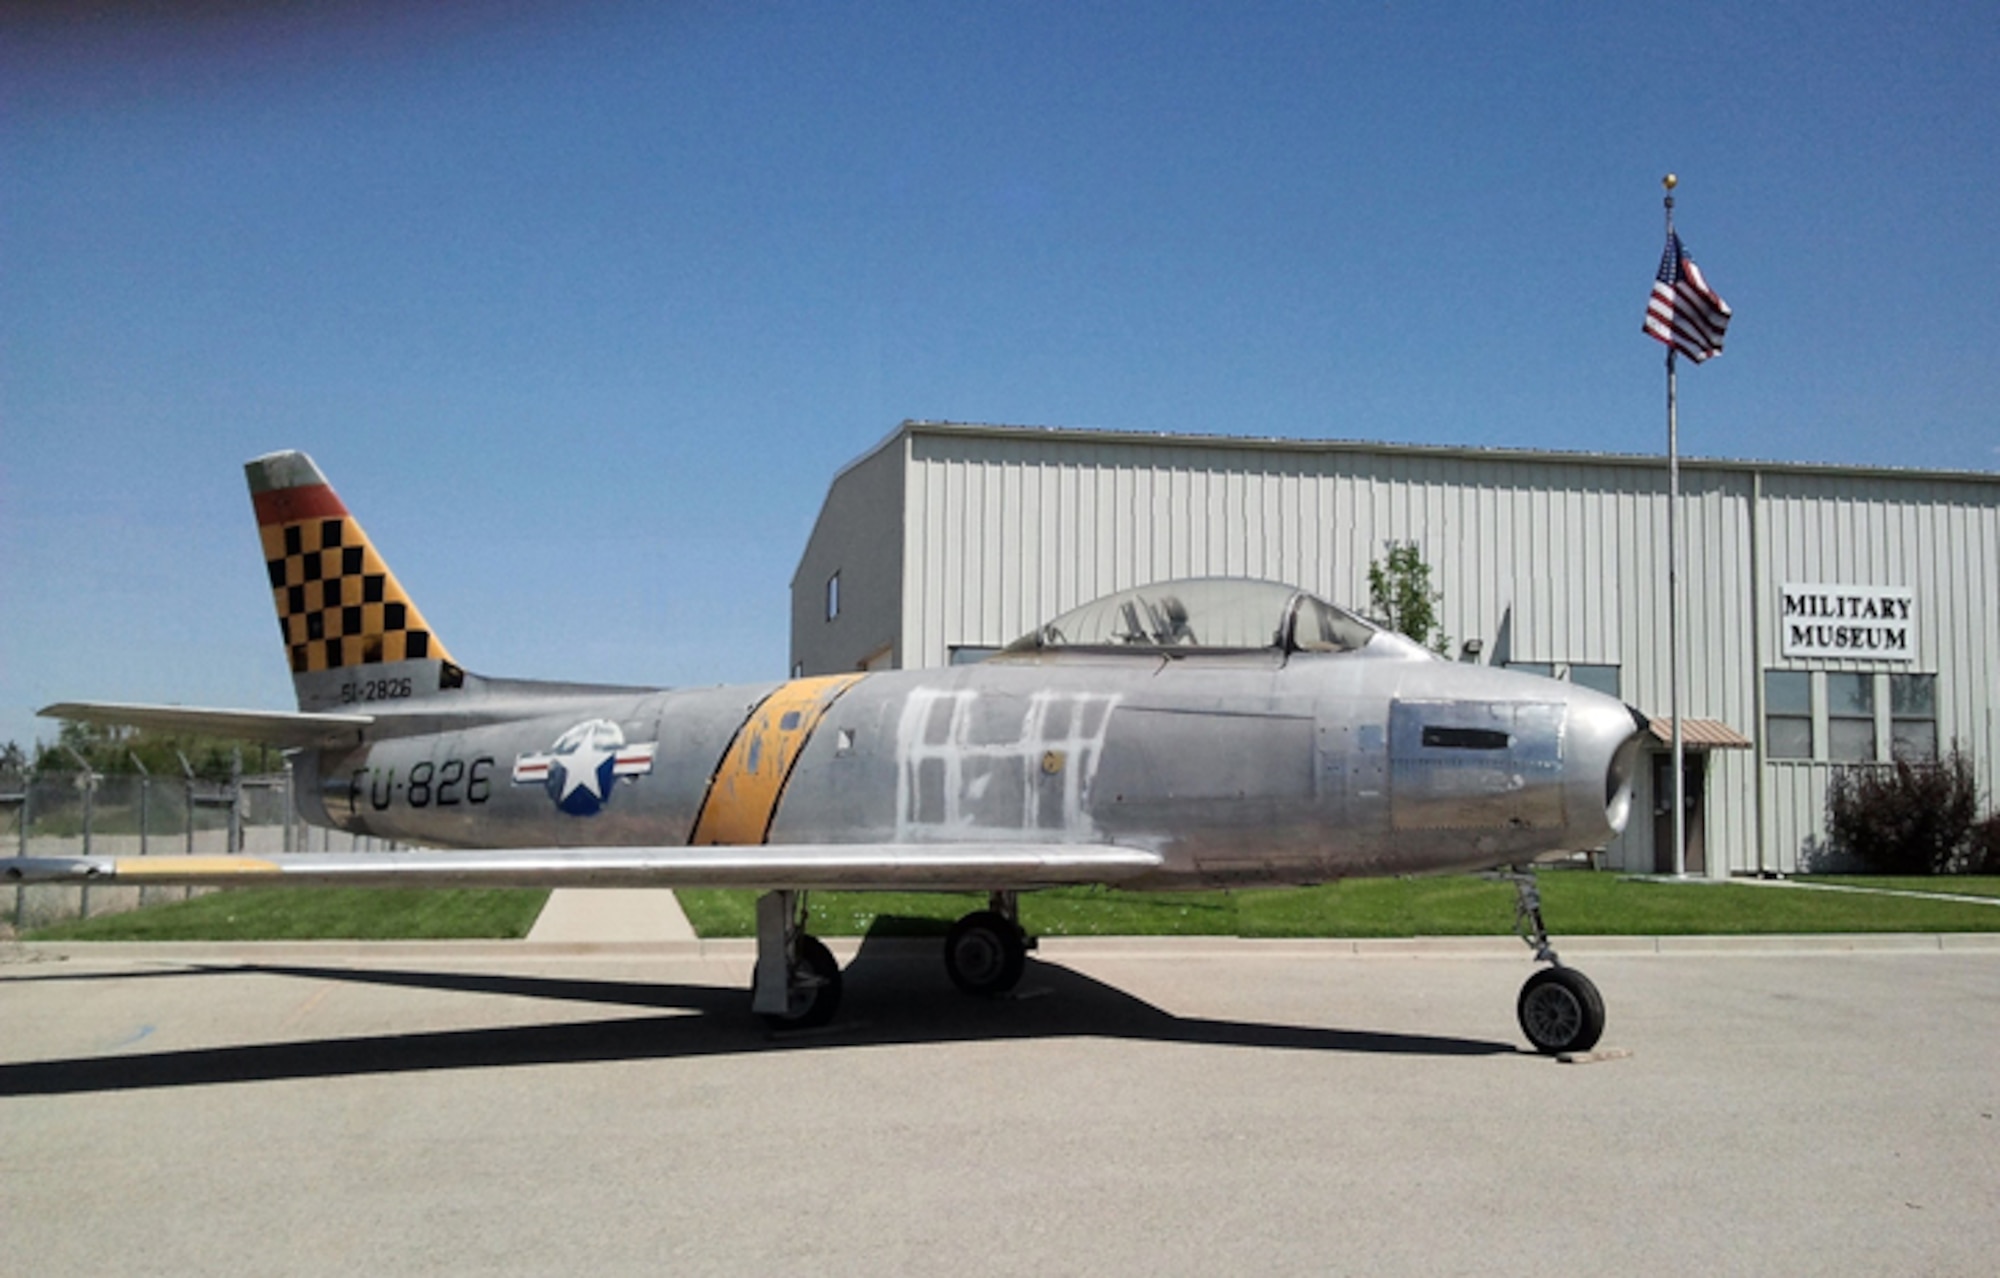 This F-86A Sabre Jet donated to the Idaho Military History Museum recently is in need of volunteers to help restore it back to its original condition.  The Idaho Air National Guard flew the F-86A Sabre Jet from 1959 to 1964. 